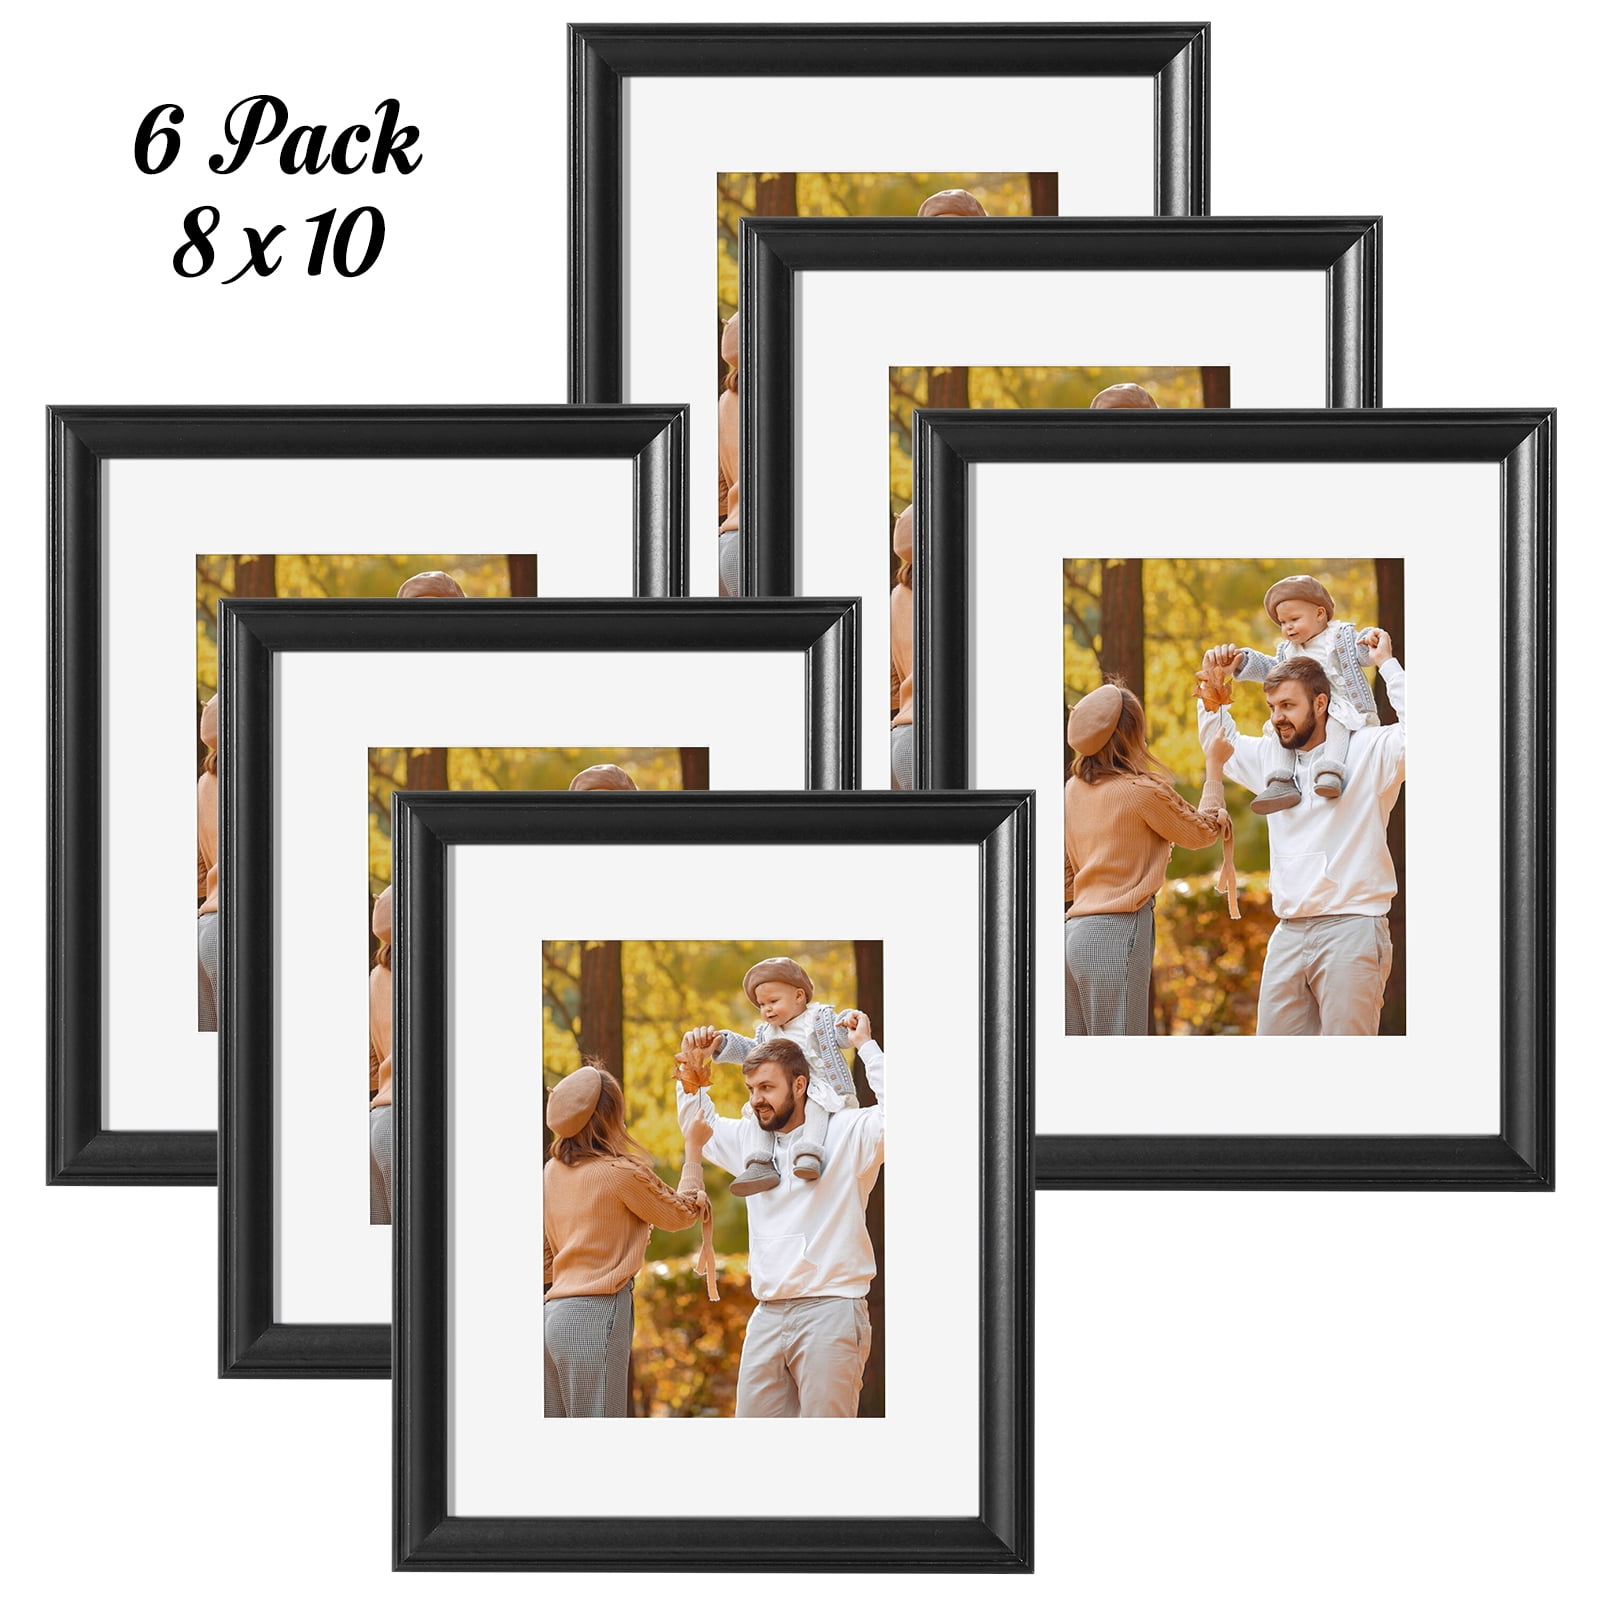 PEALSN 8x10 Picture Frame Set of 6, Display Pictures 5x7 with Mat or 8x10  Without Mat for Wall Mounting or Table Top Display, Photo Frames Collage  for Wall Decor, Black Woodgrain.